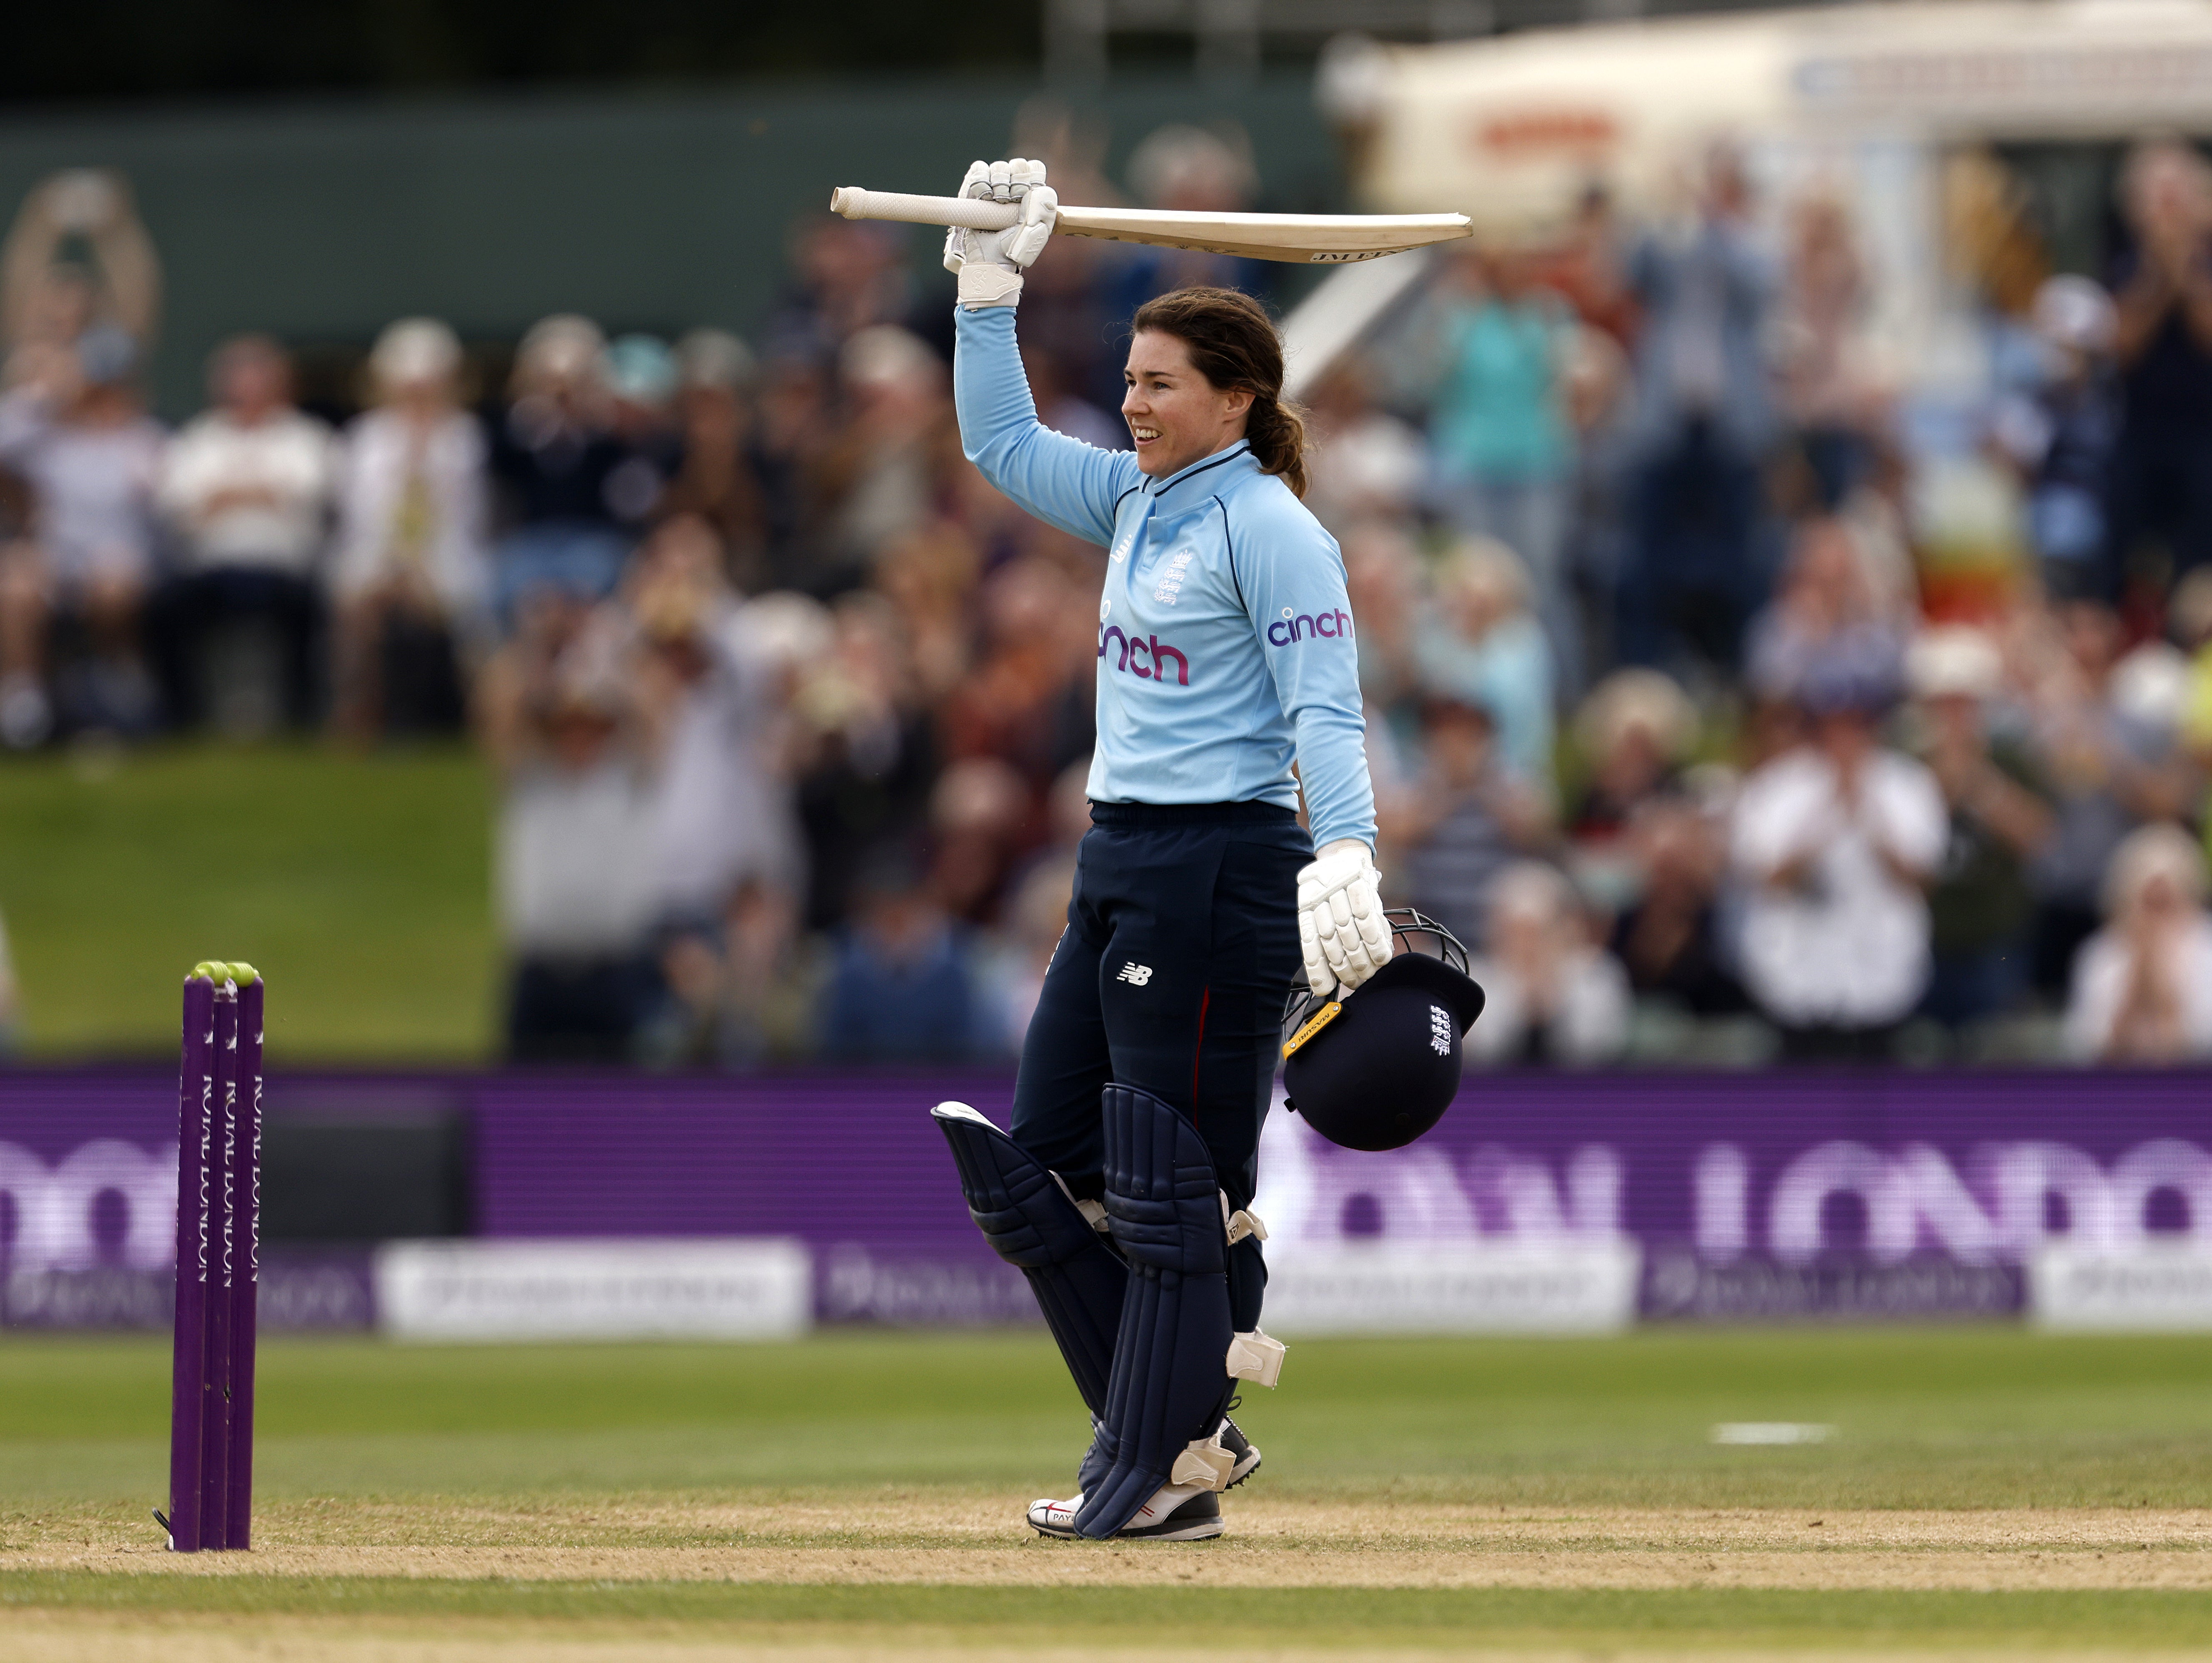 Tammy Beaumont has drawn attention to some of the key issues in women’s sport